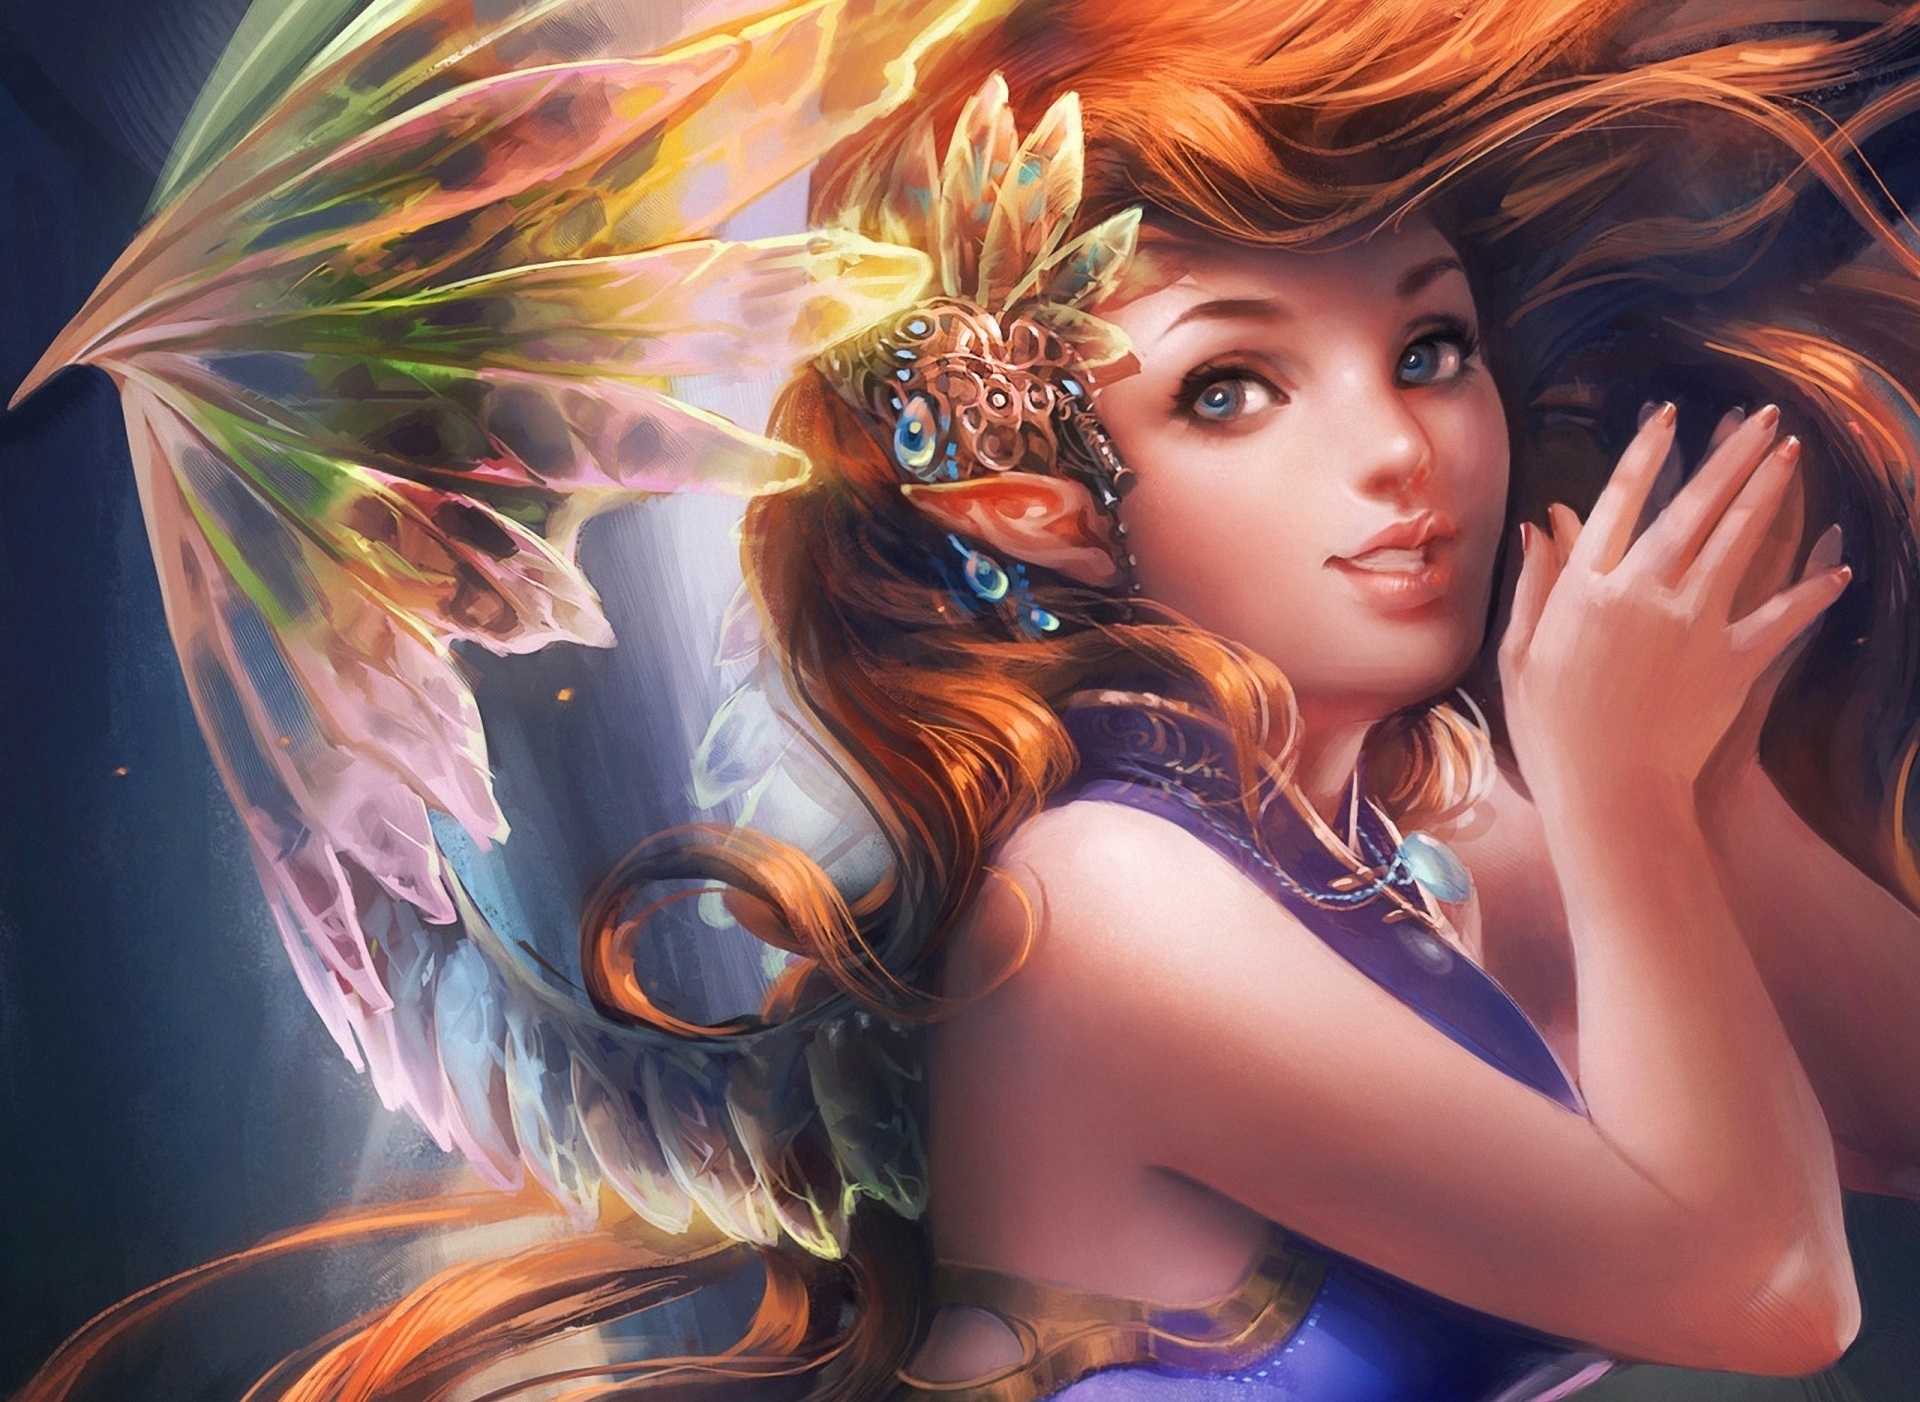 3d hot wallpapers,cg artwork,illustration,fictional character,anime,cool